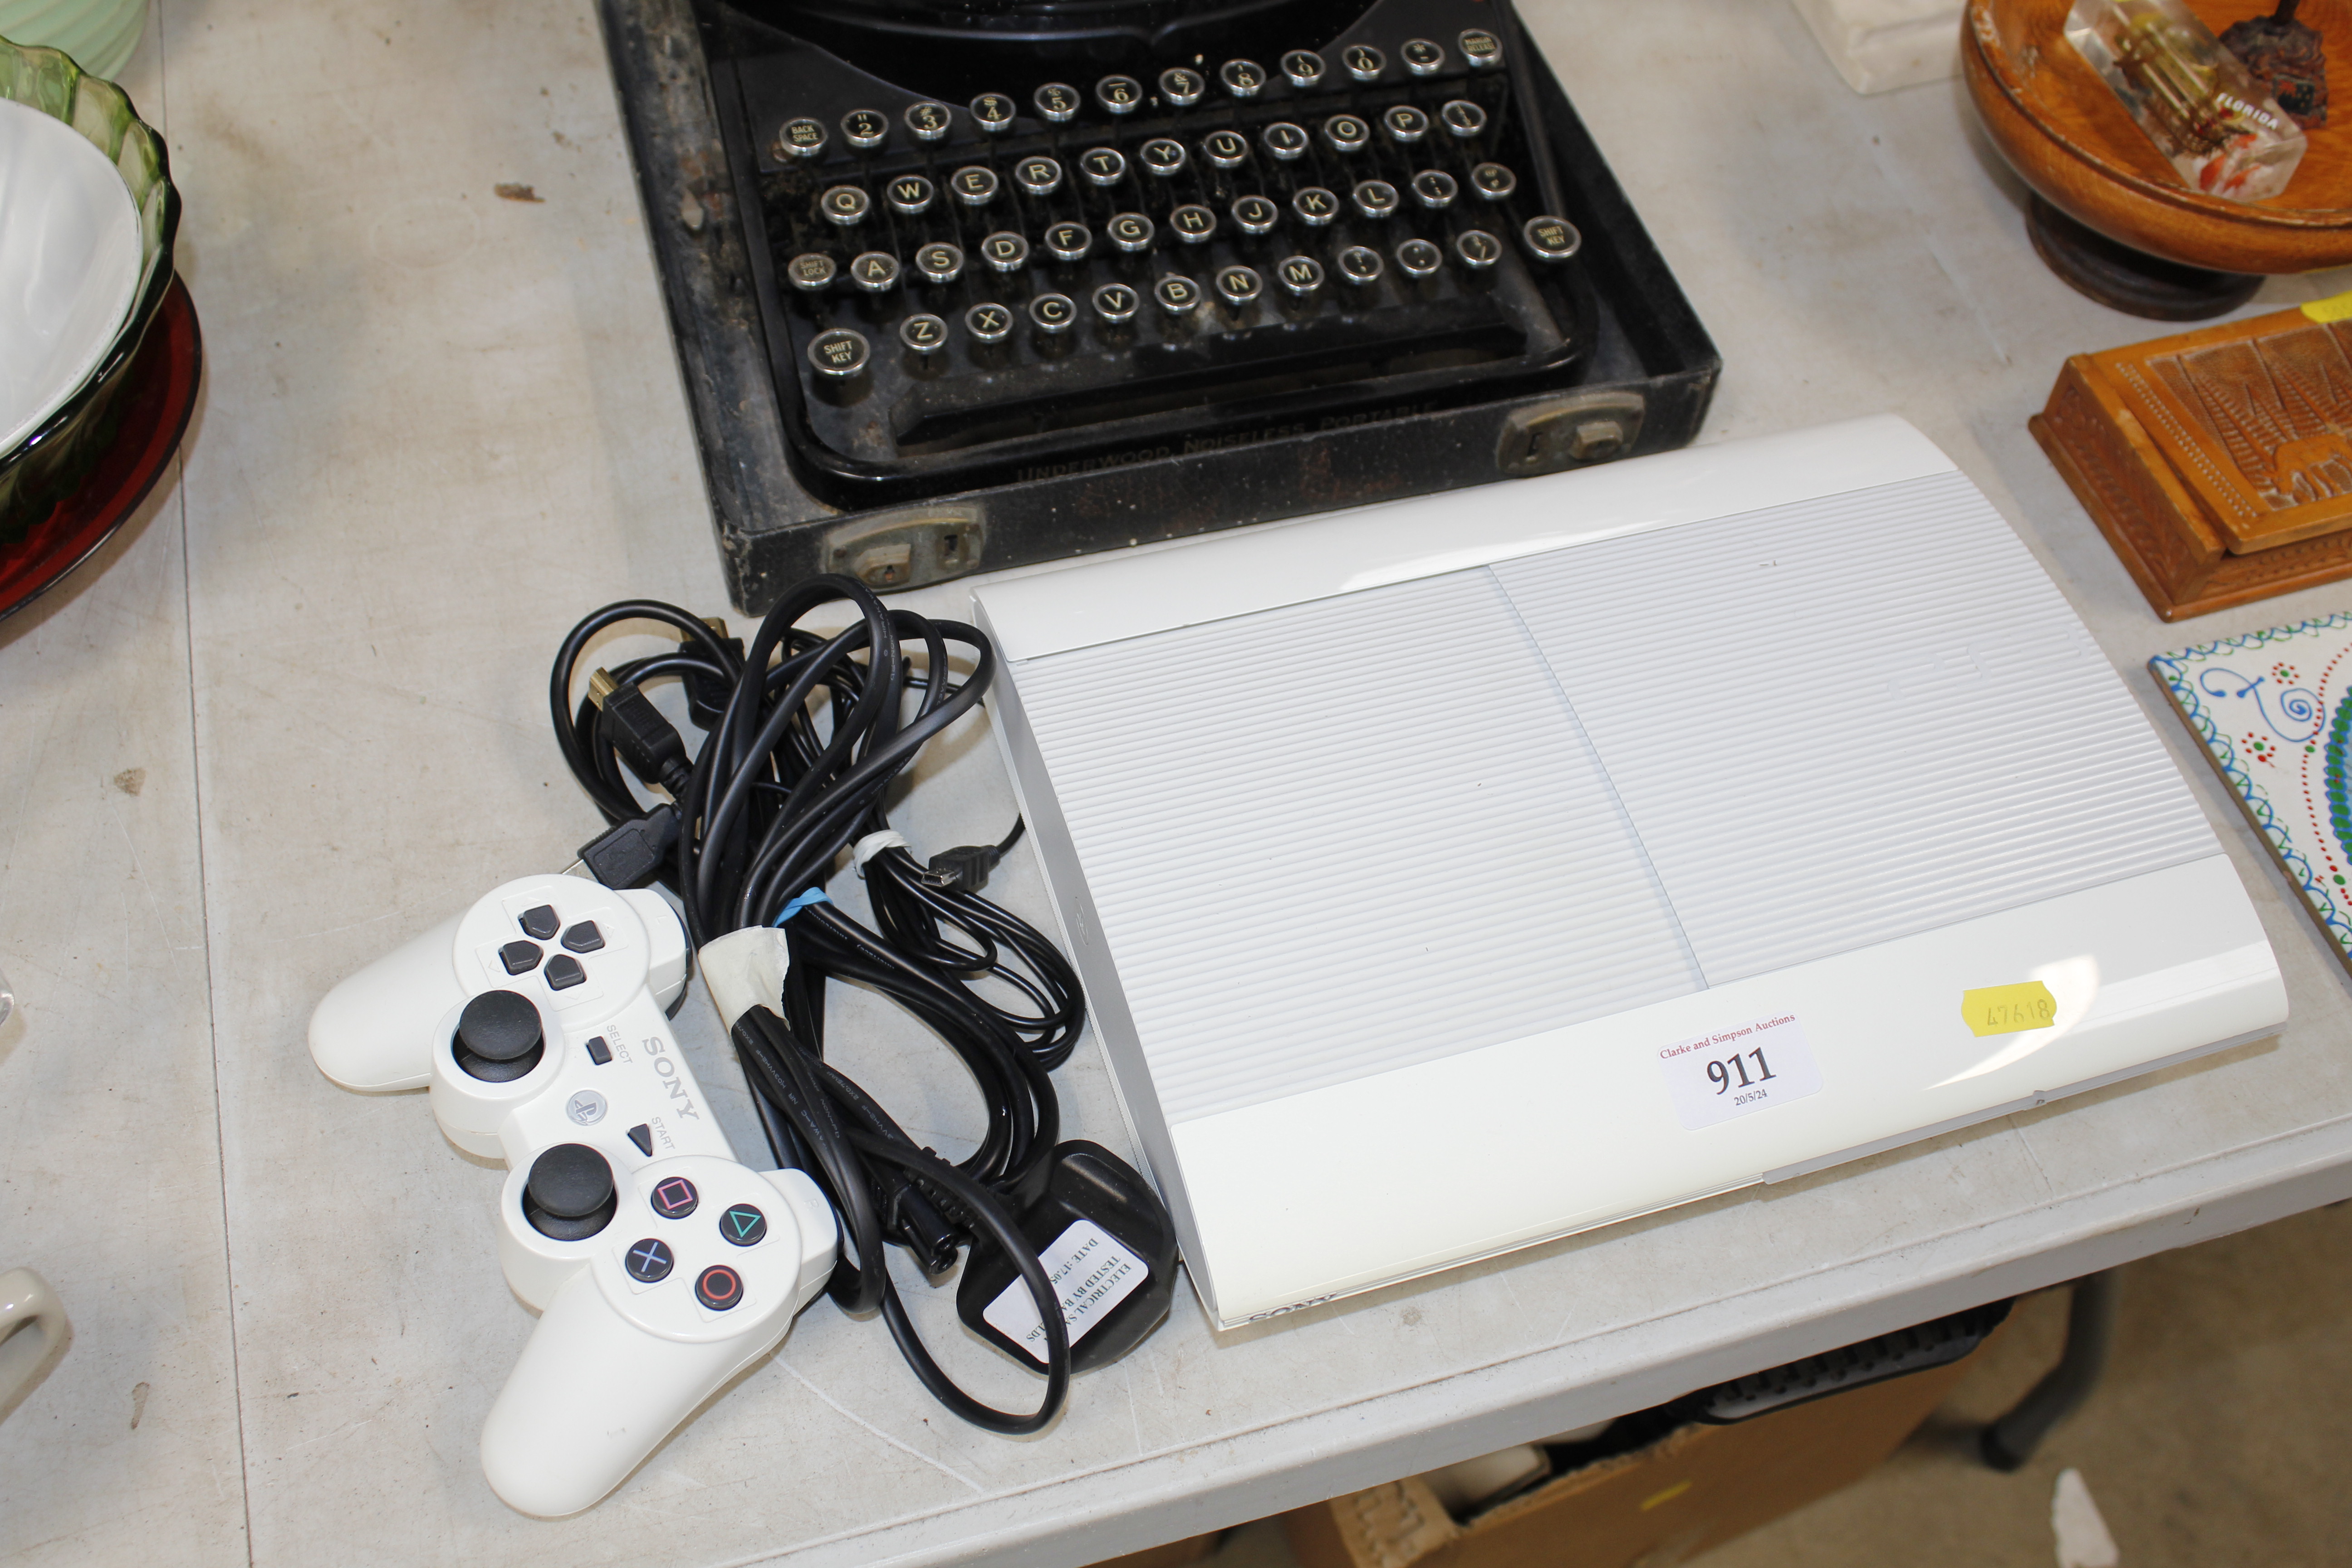 A Sony PlayStation III with remote control